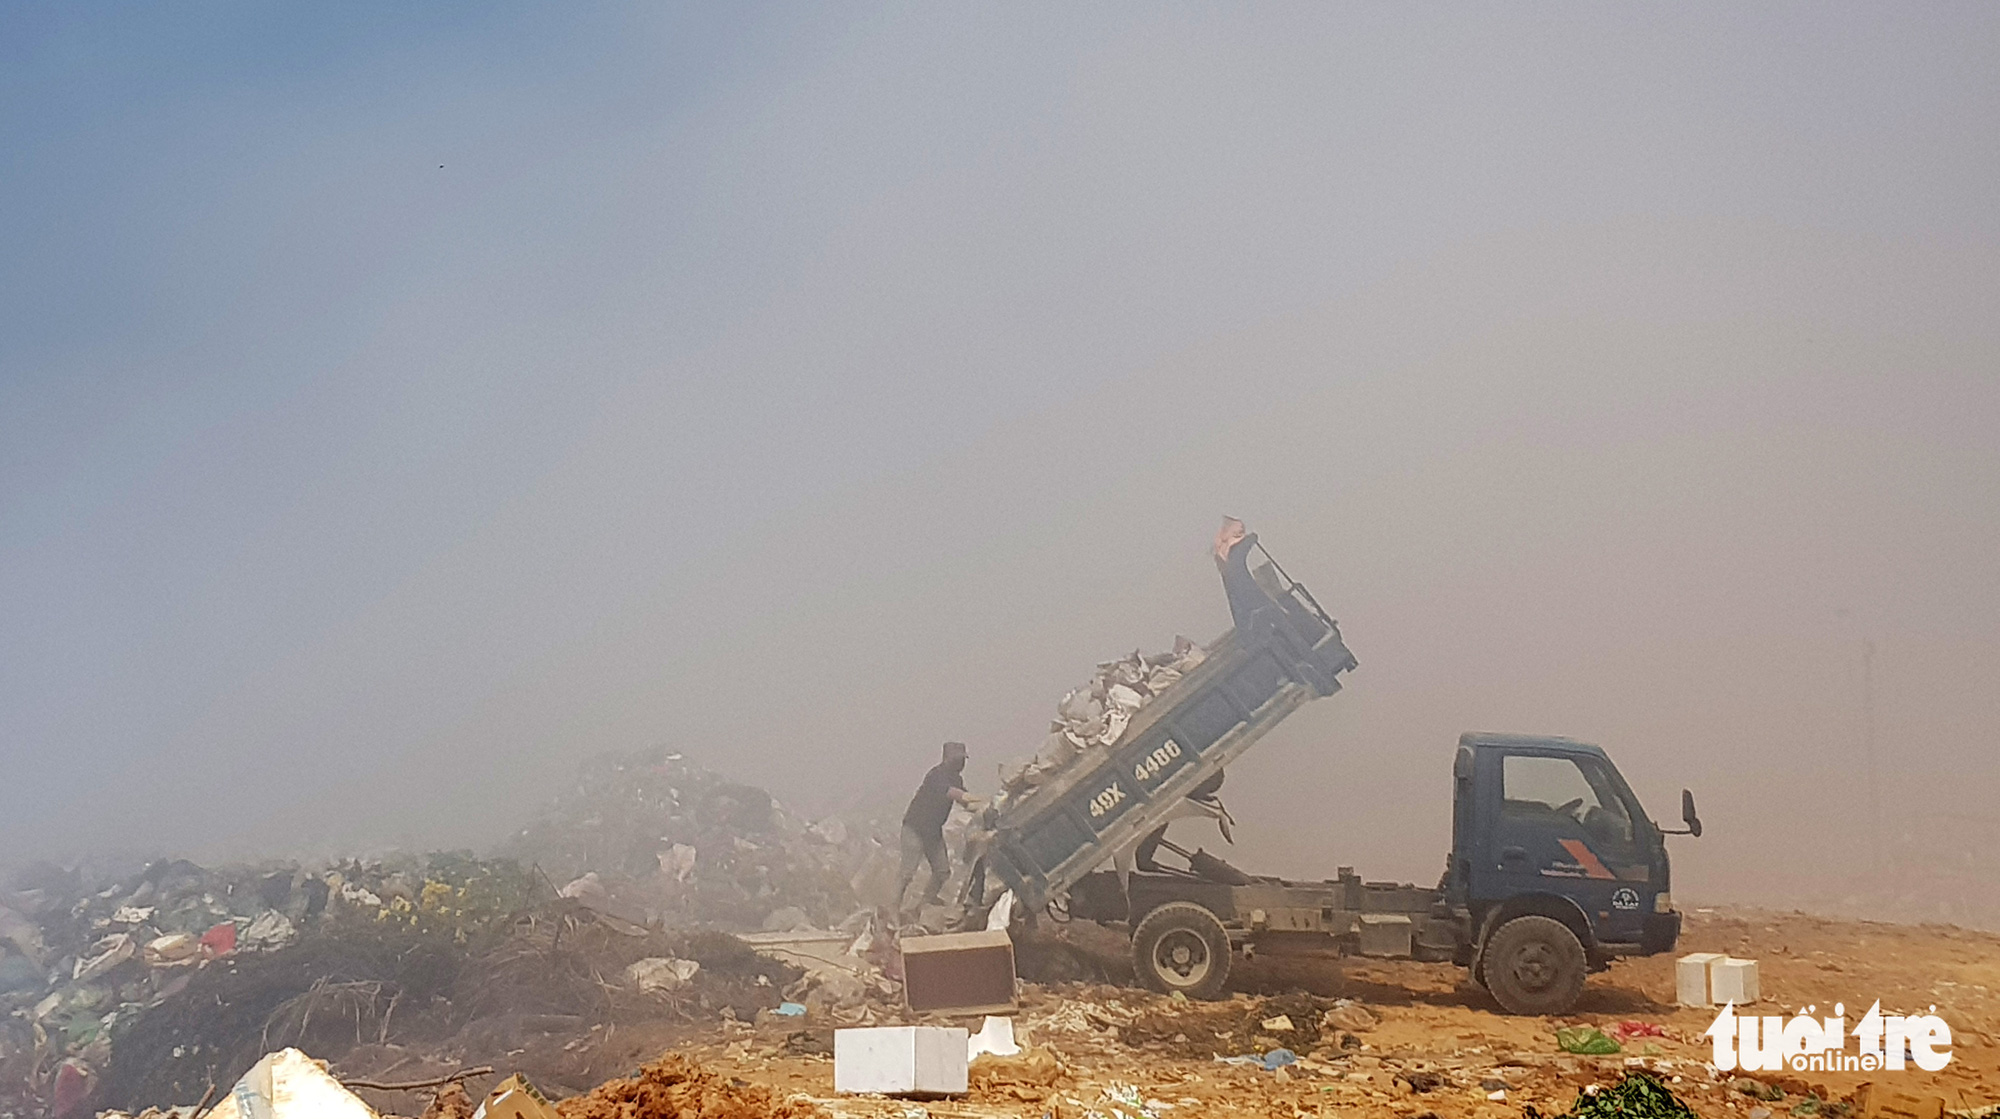 The Cam Ly Landfill in Da Lat City, Lam Dong Province in the Central Highlands region of Vietnam still receives garbage on a daily basis despite a smoldering fire. Photo: L.D / Tuoi Tre